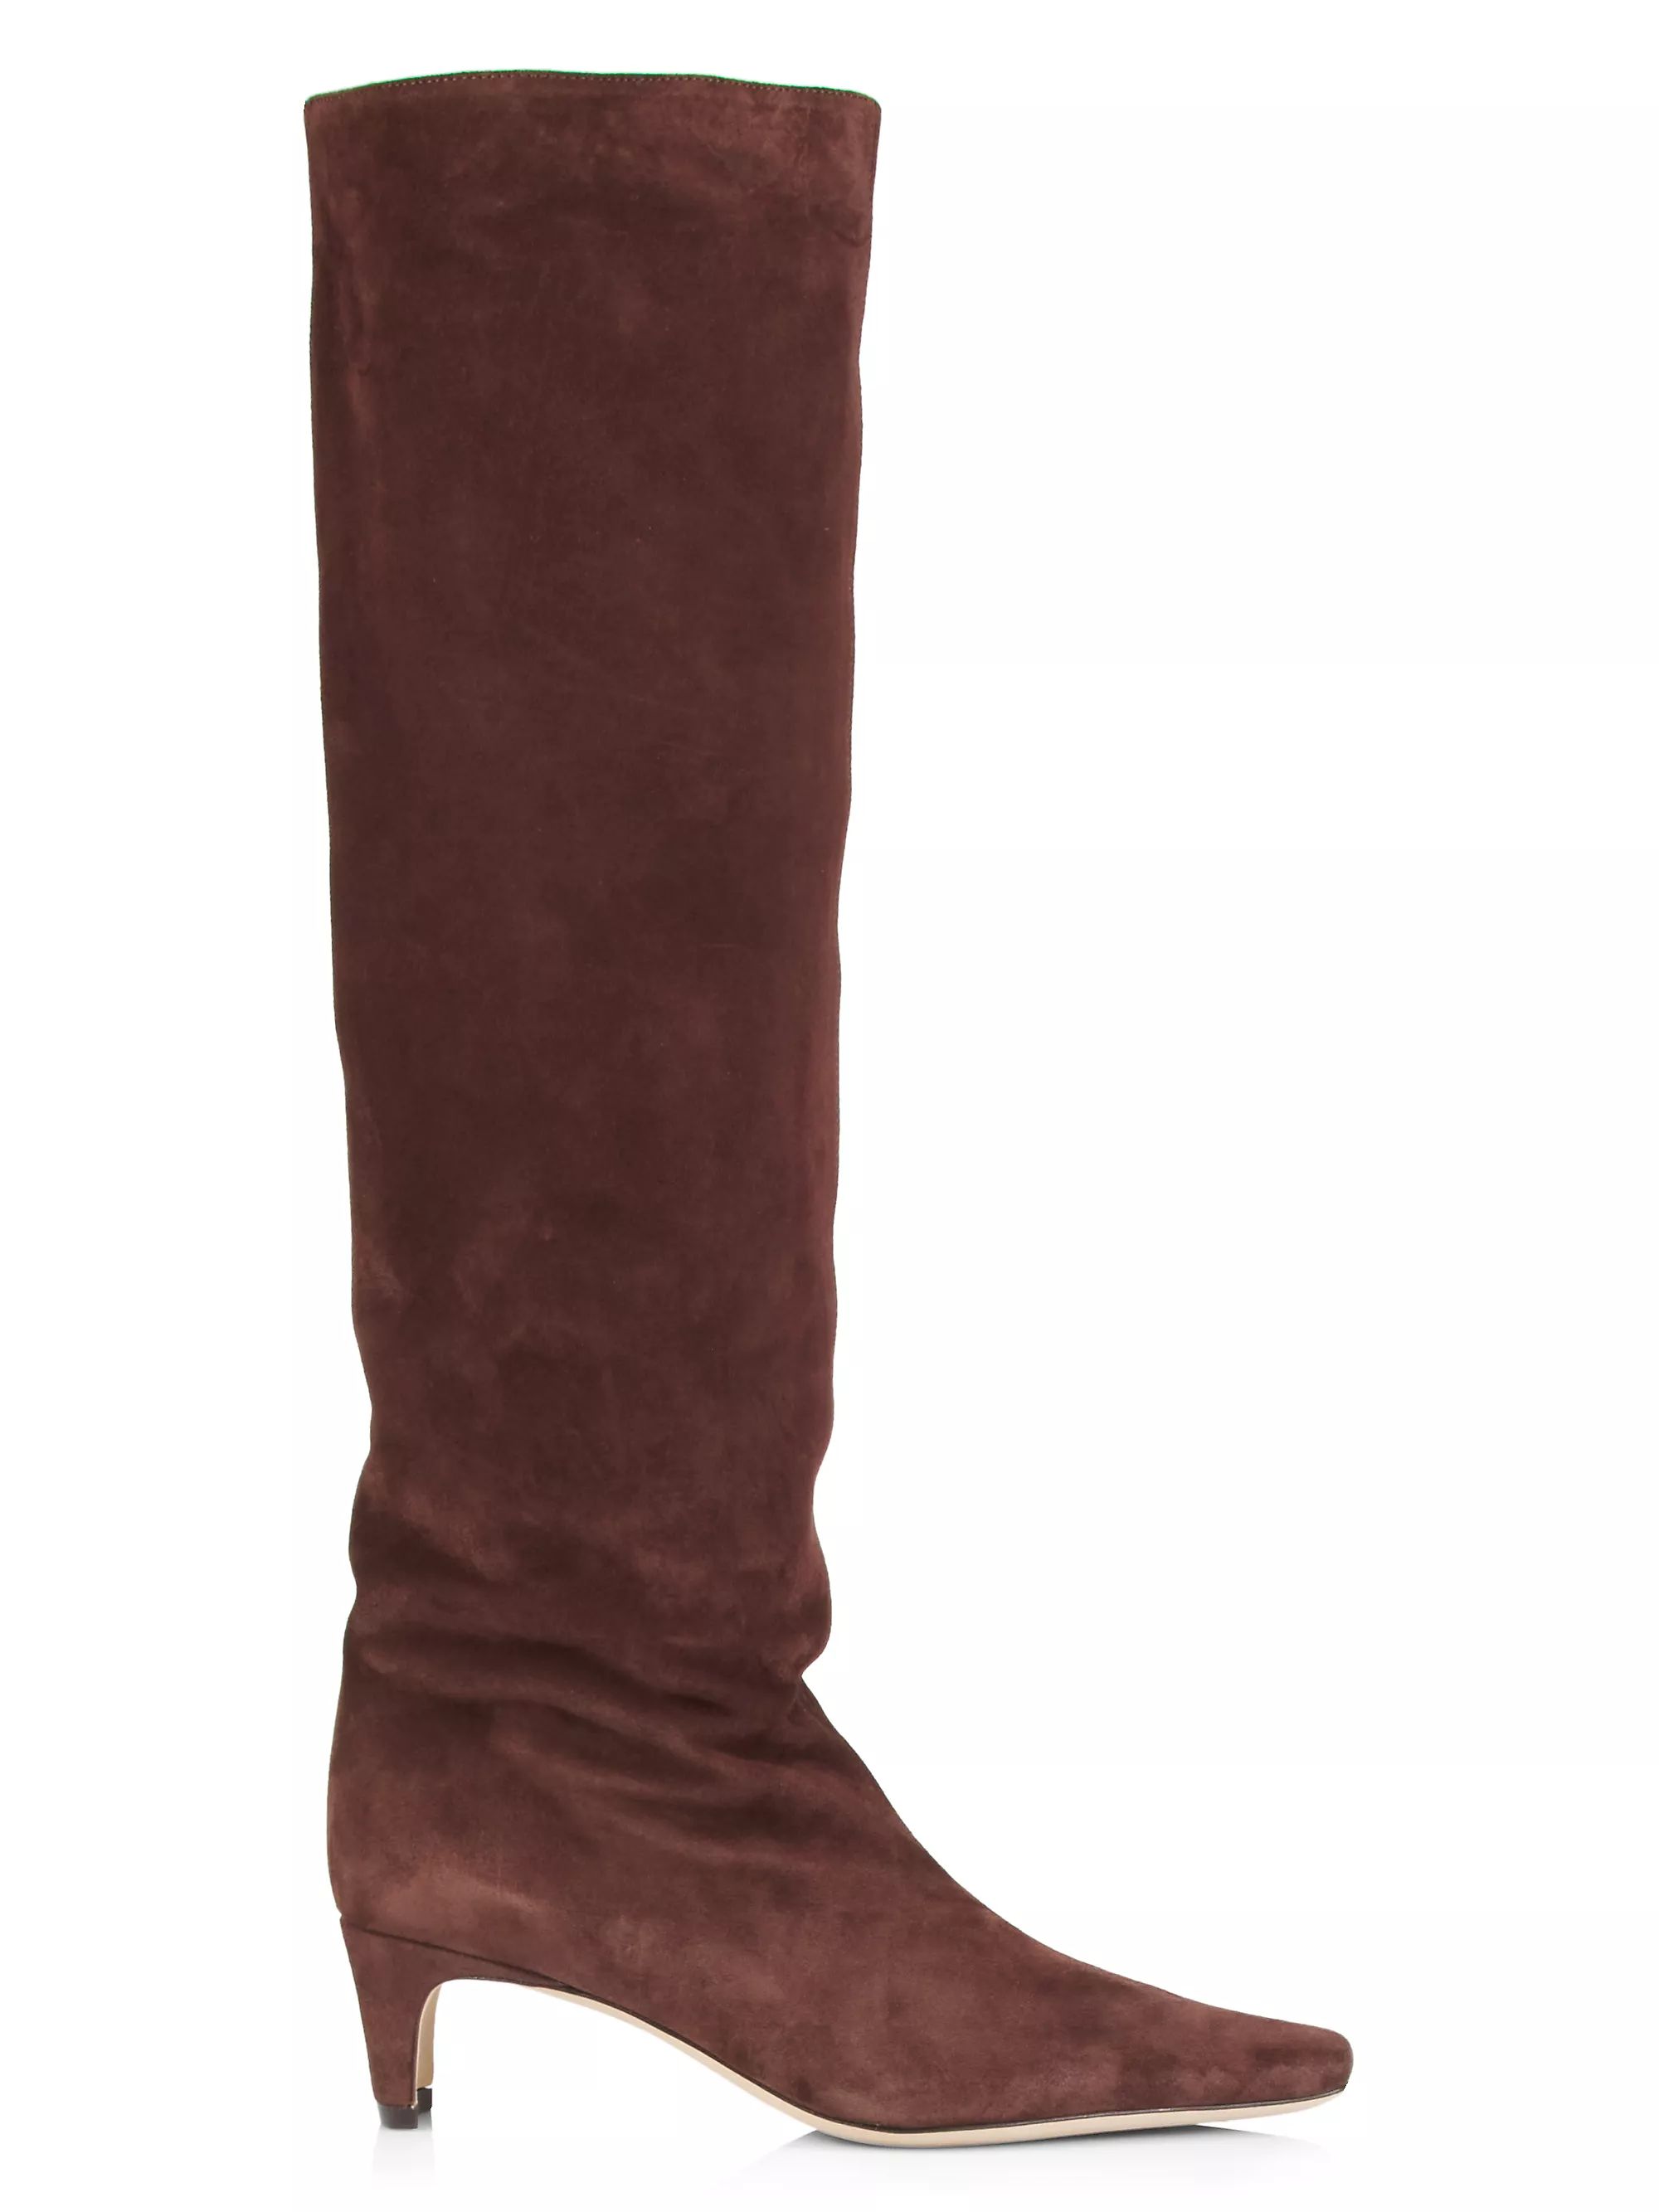 Wally Suede Knee-High Boots | Saks Fifth Avenue